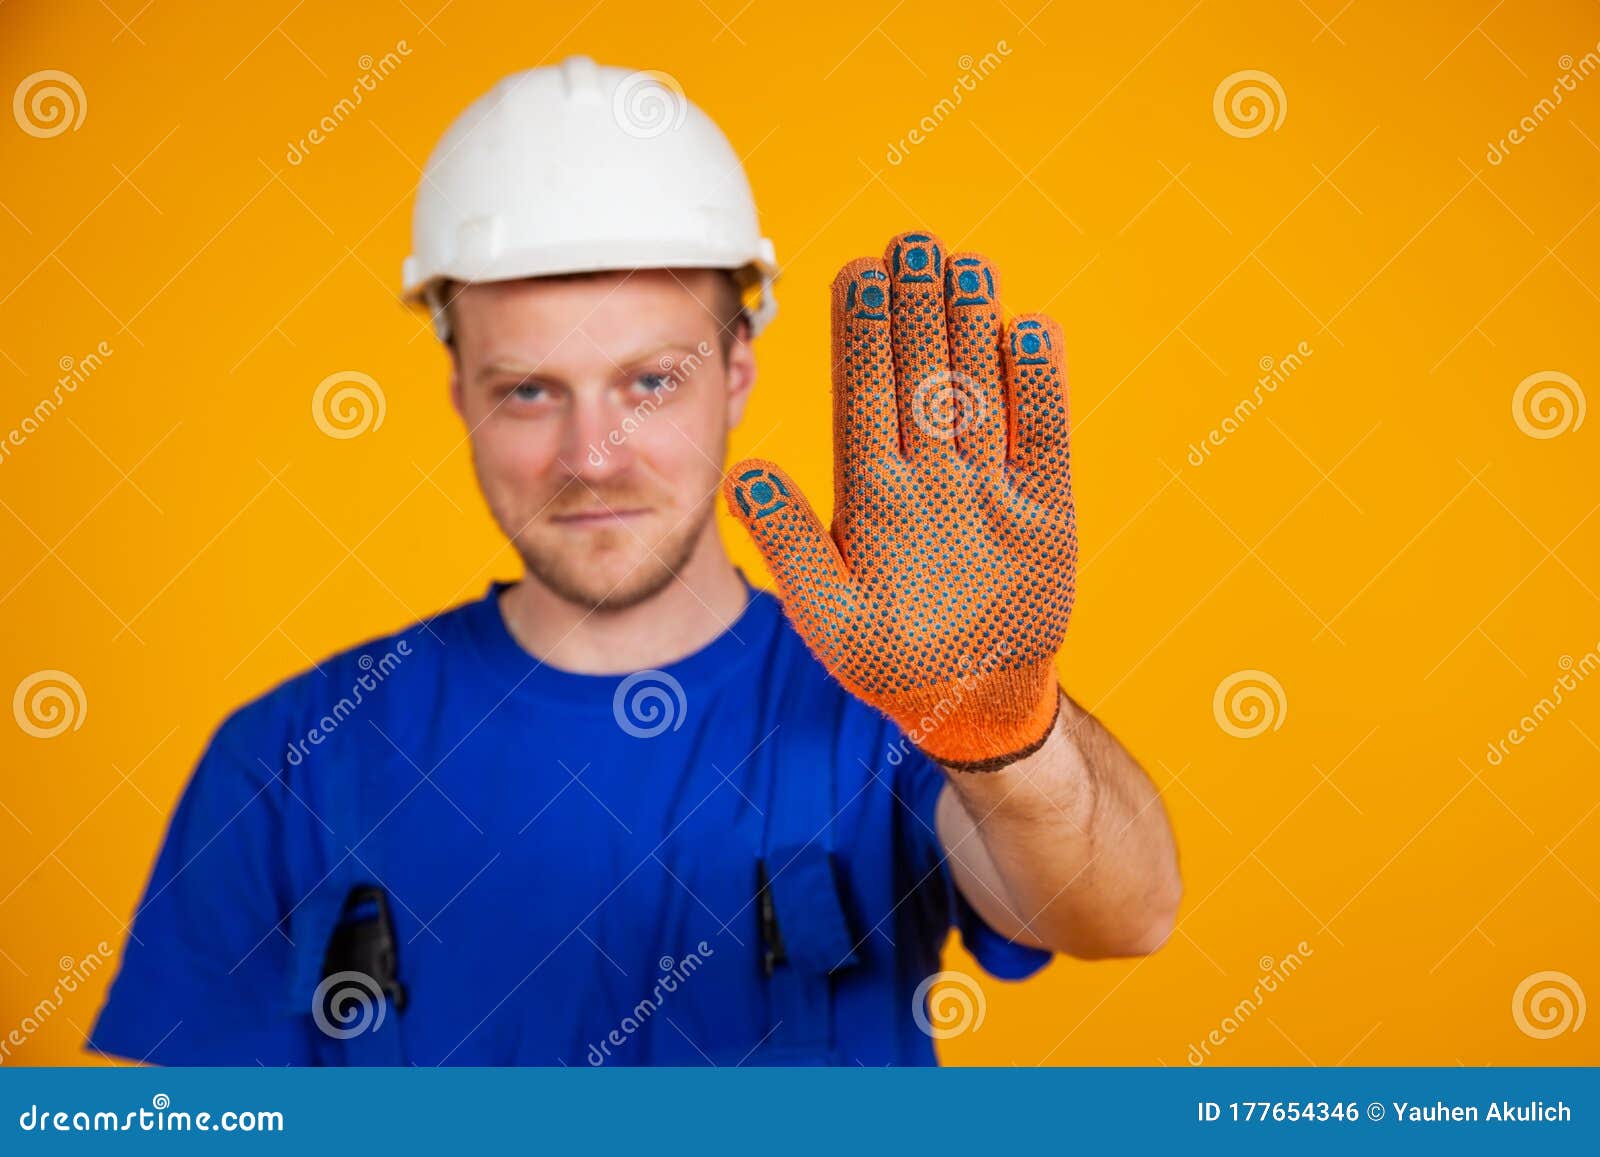 Male Worker Shows Stop Hand Gesture. Worker in Overalls and Protective ...